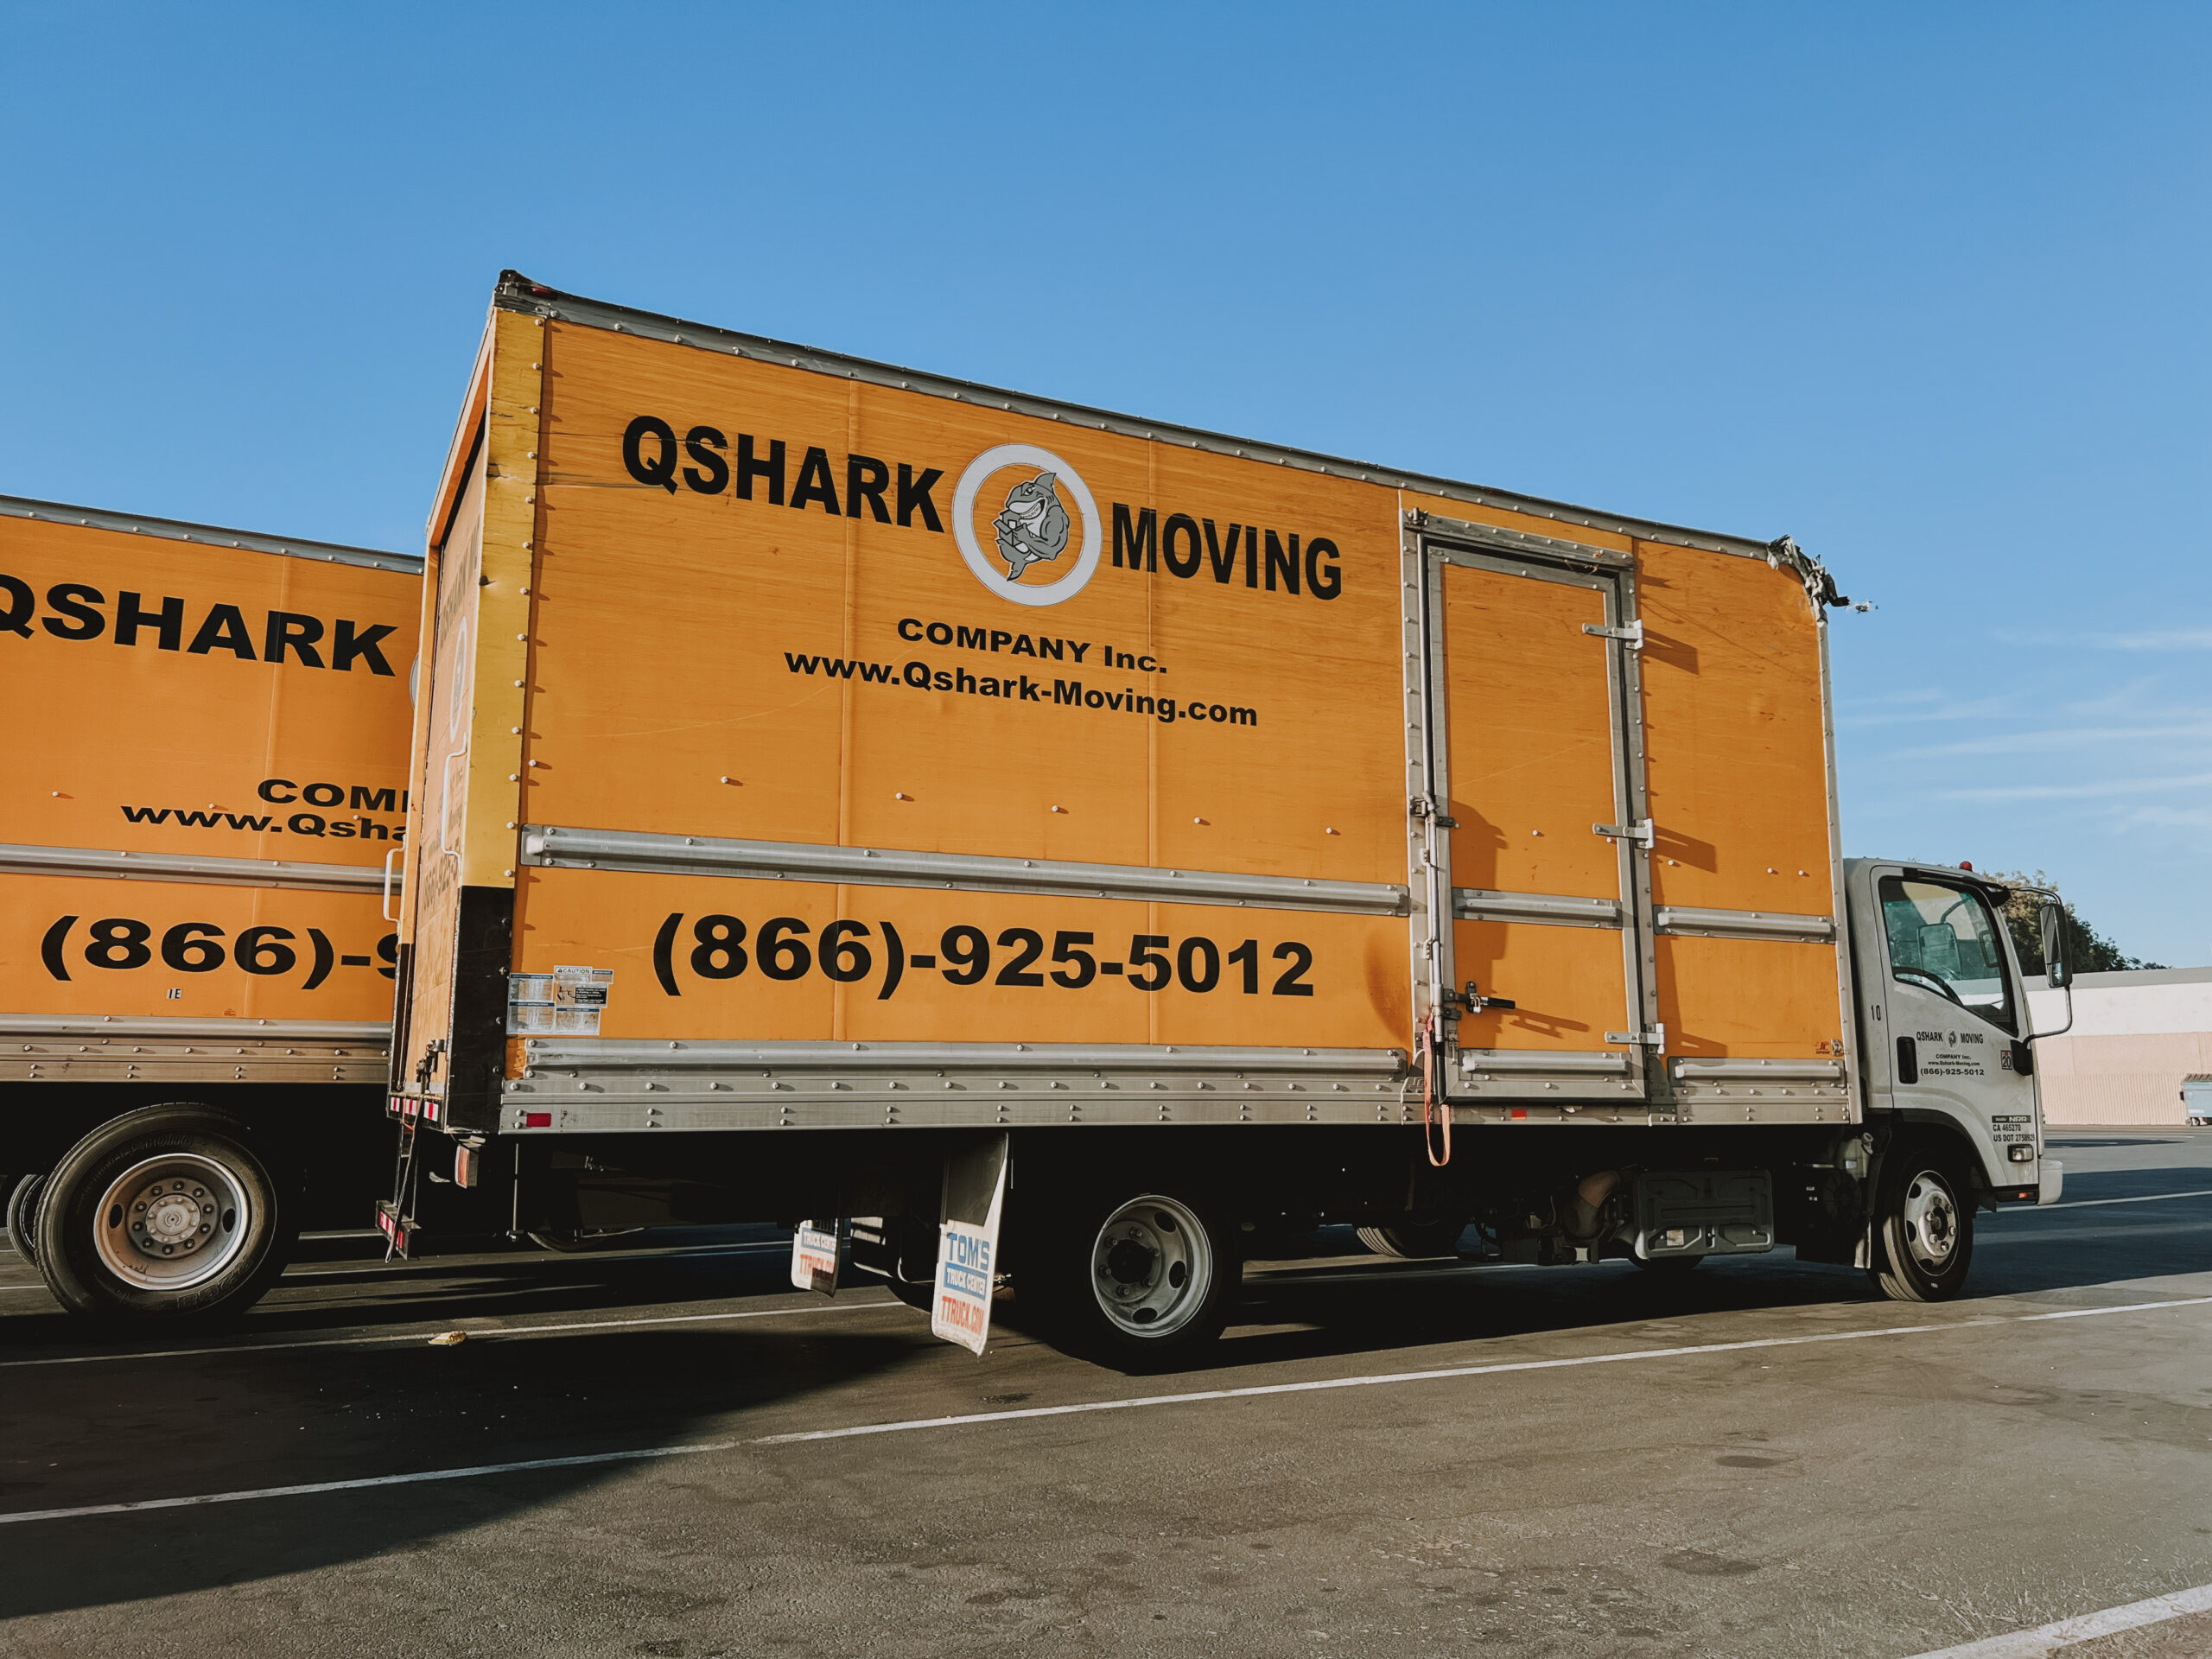 Qshark Moving Trucks getting ready for long distance moving.